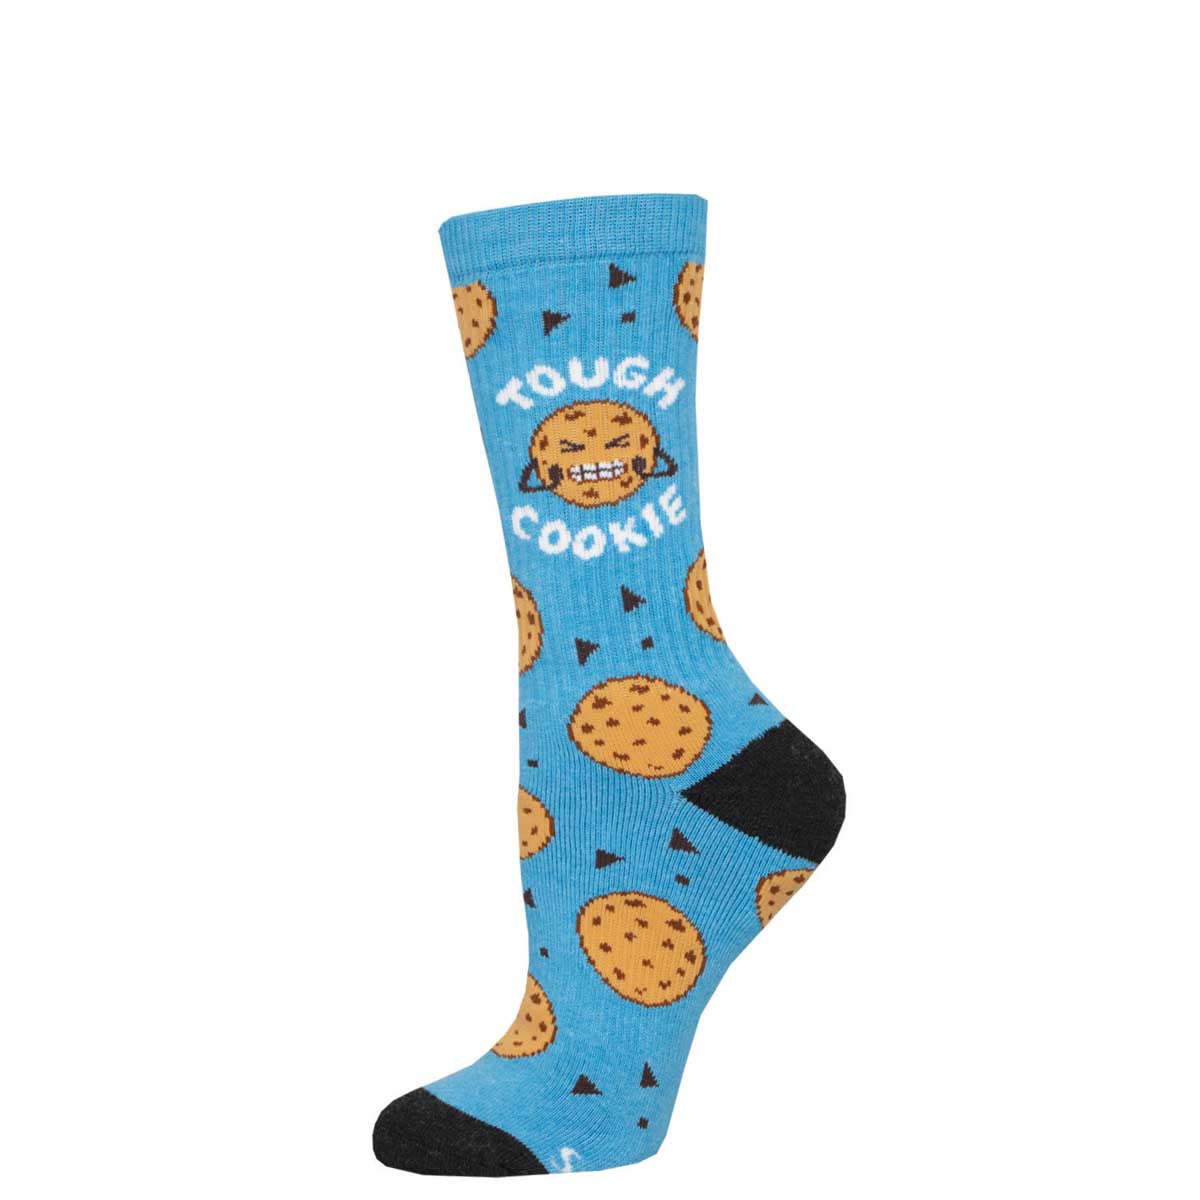 Athletic Novelty Crew "Tough Cookie" Socks